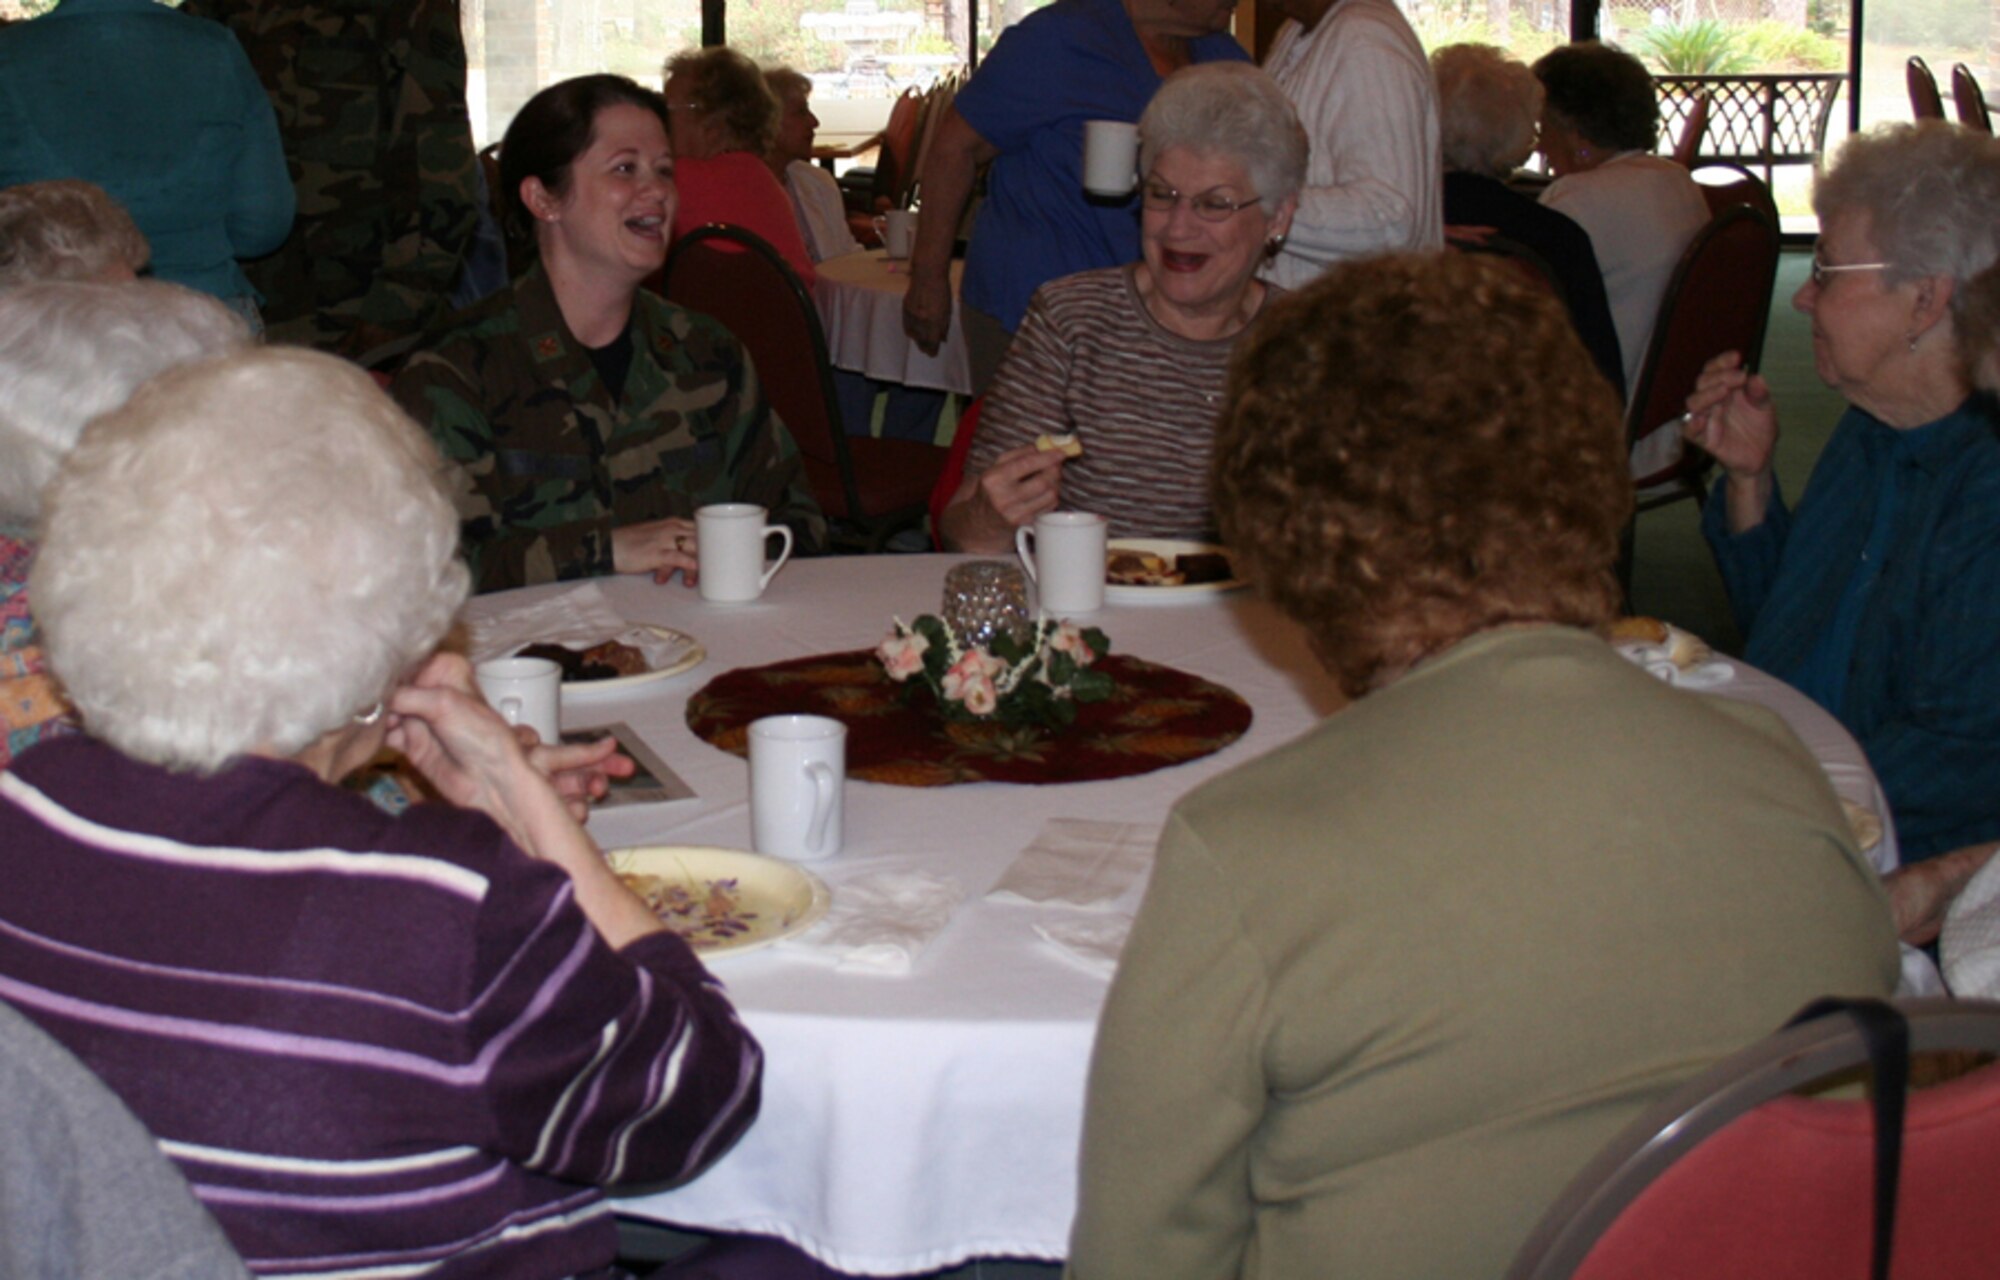 An Airman enjoys the company of Air Force Enlisted Village residents during an afternoon tea March 15. Many women Air Commandos took part in the tea and a workday, assisting the residents with small chores around the village. (U.S. Air Force photo by Jodi Jordan)